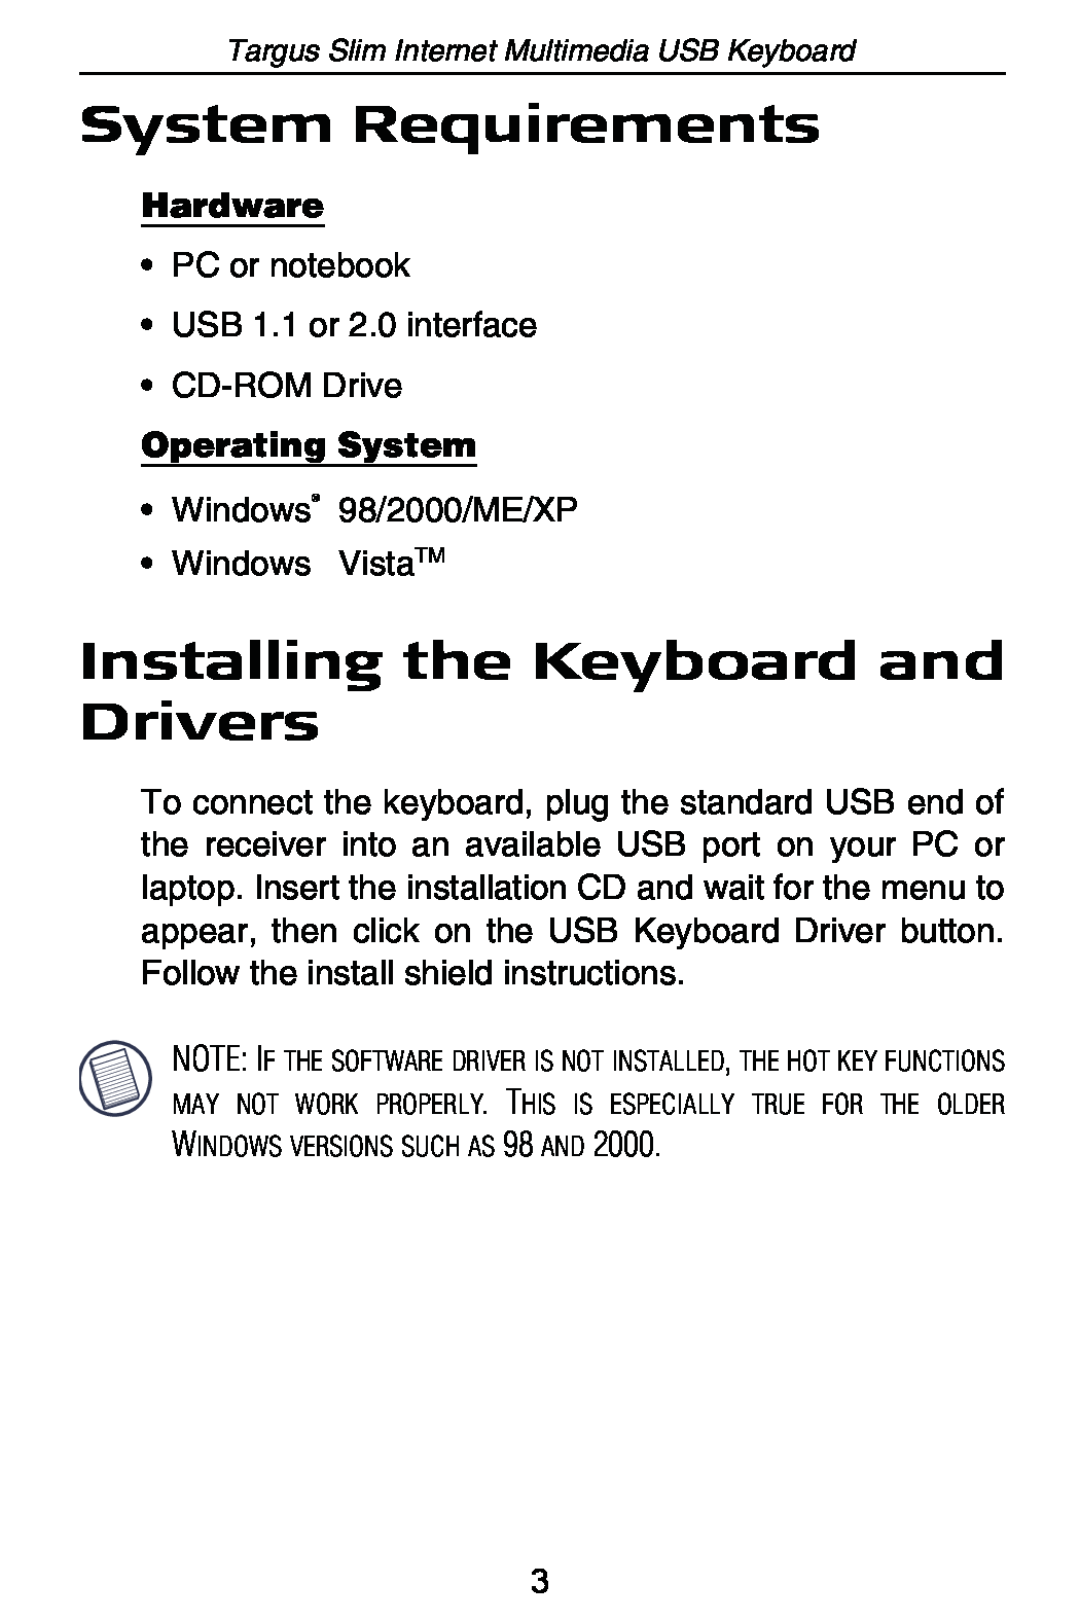 Targus internet multimedia USB keyboard specifications System Requirements, Installing the Keyboard and Drivers, Hardware 